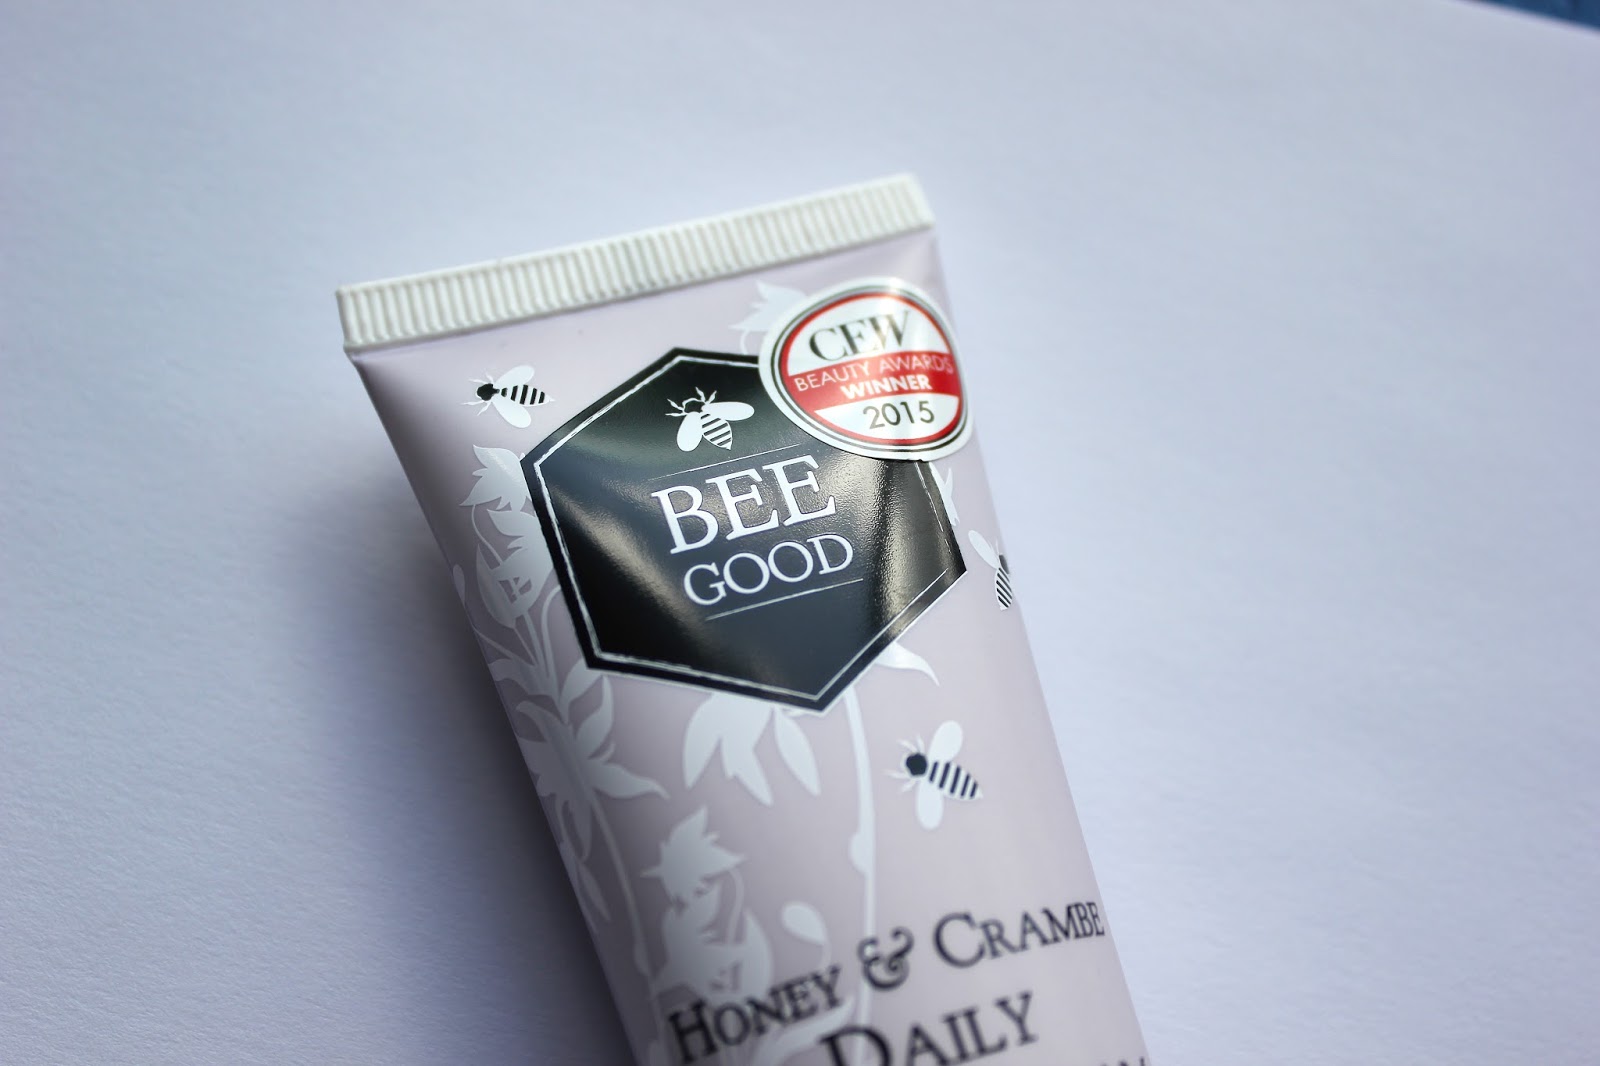 beauty review on the bee good honey and crambe daily hand cream